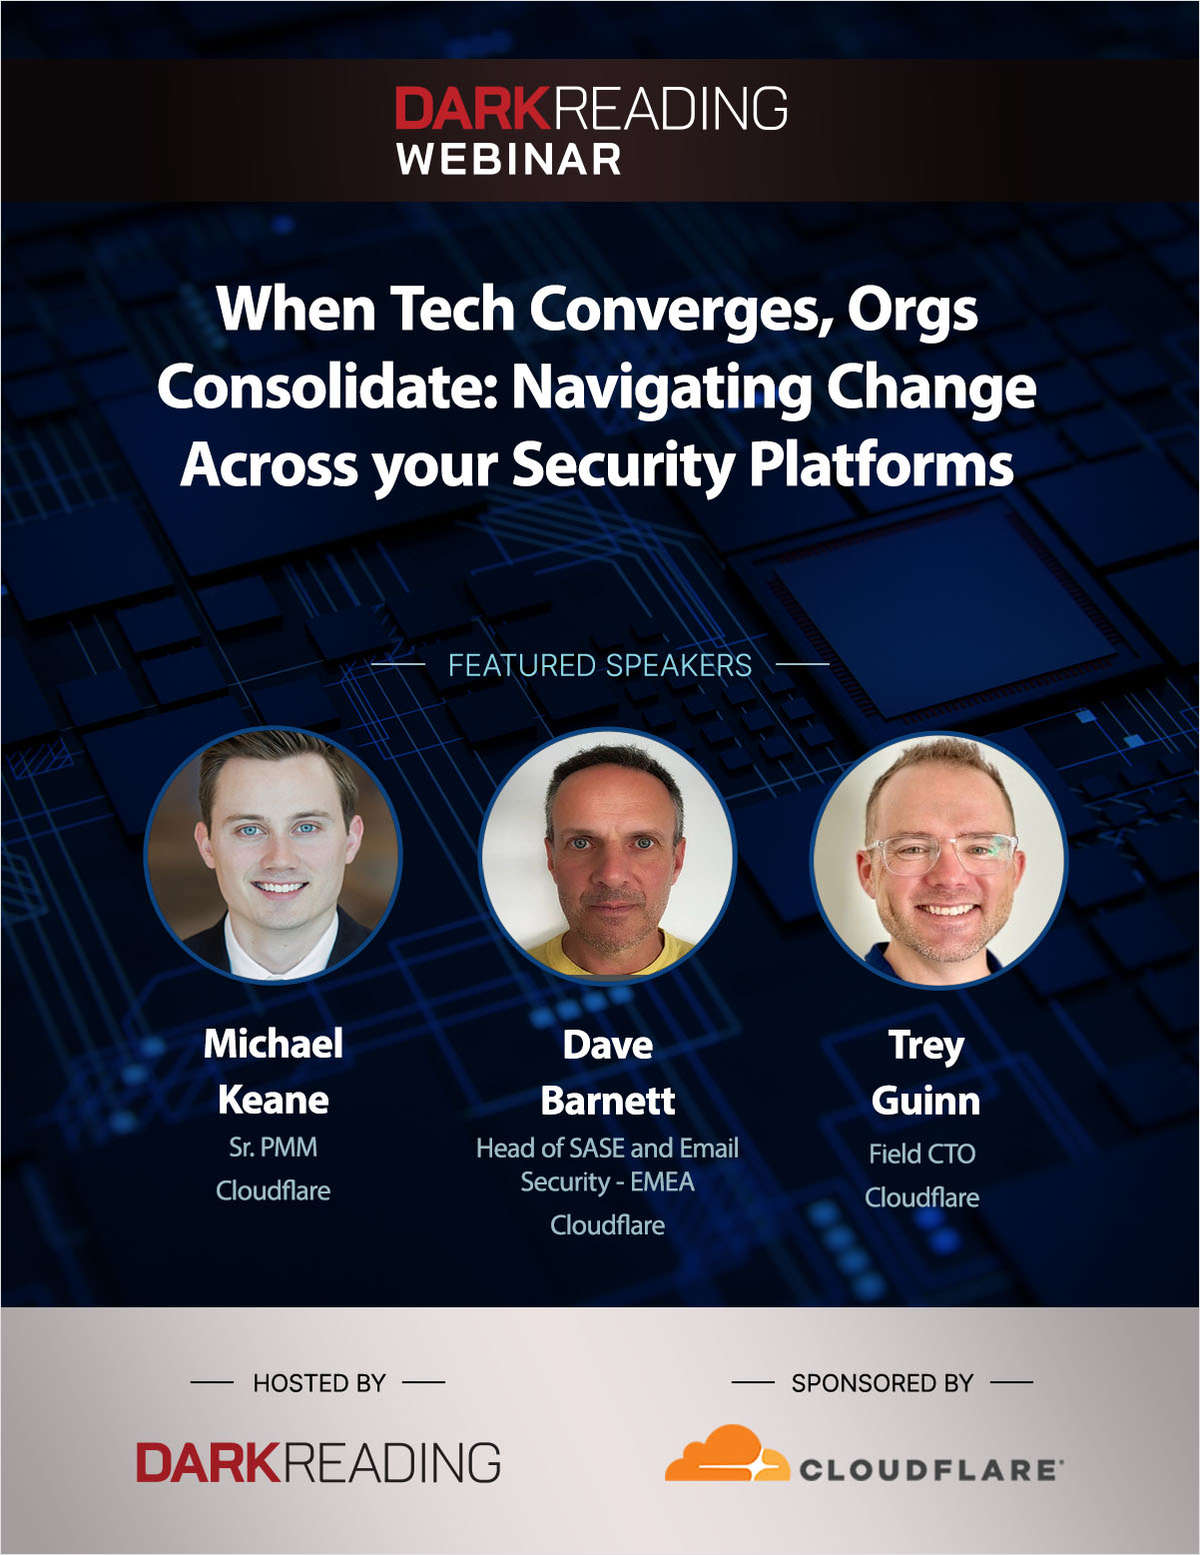 When Tech Converges, Orgs Consolidate: Navigating Change Across your Security Platforms